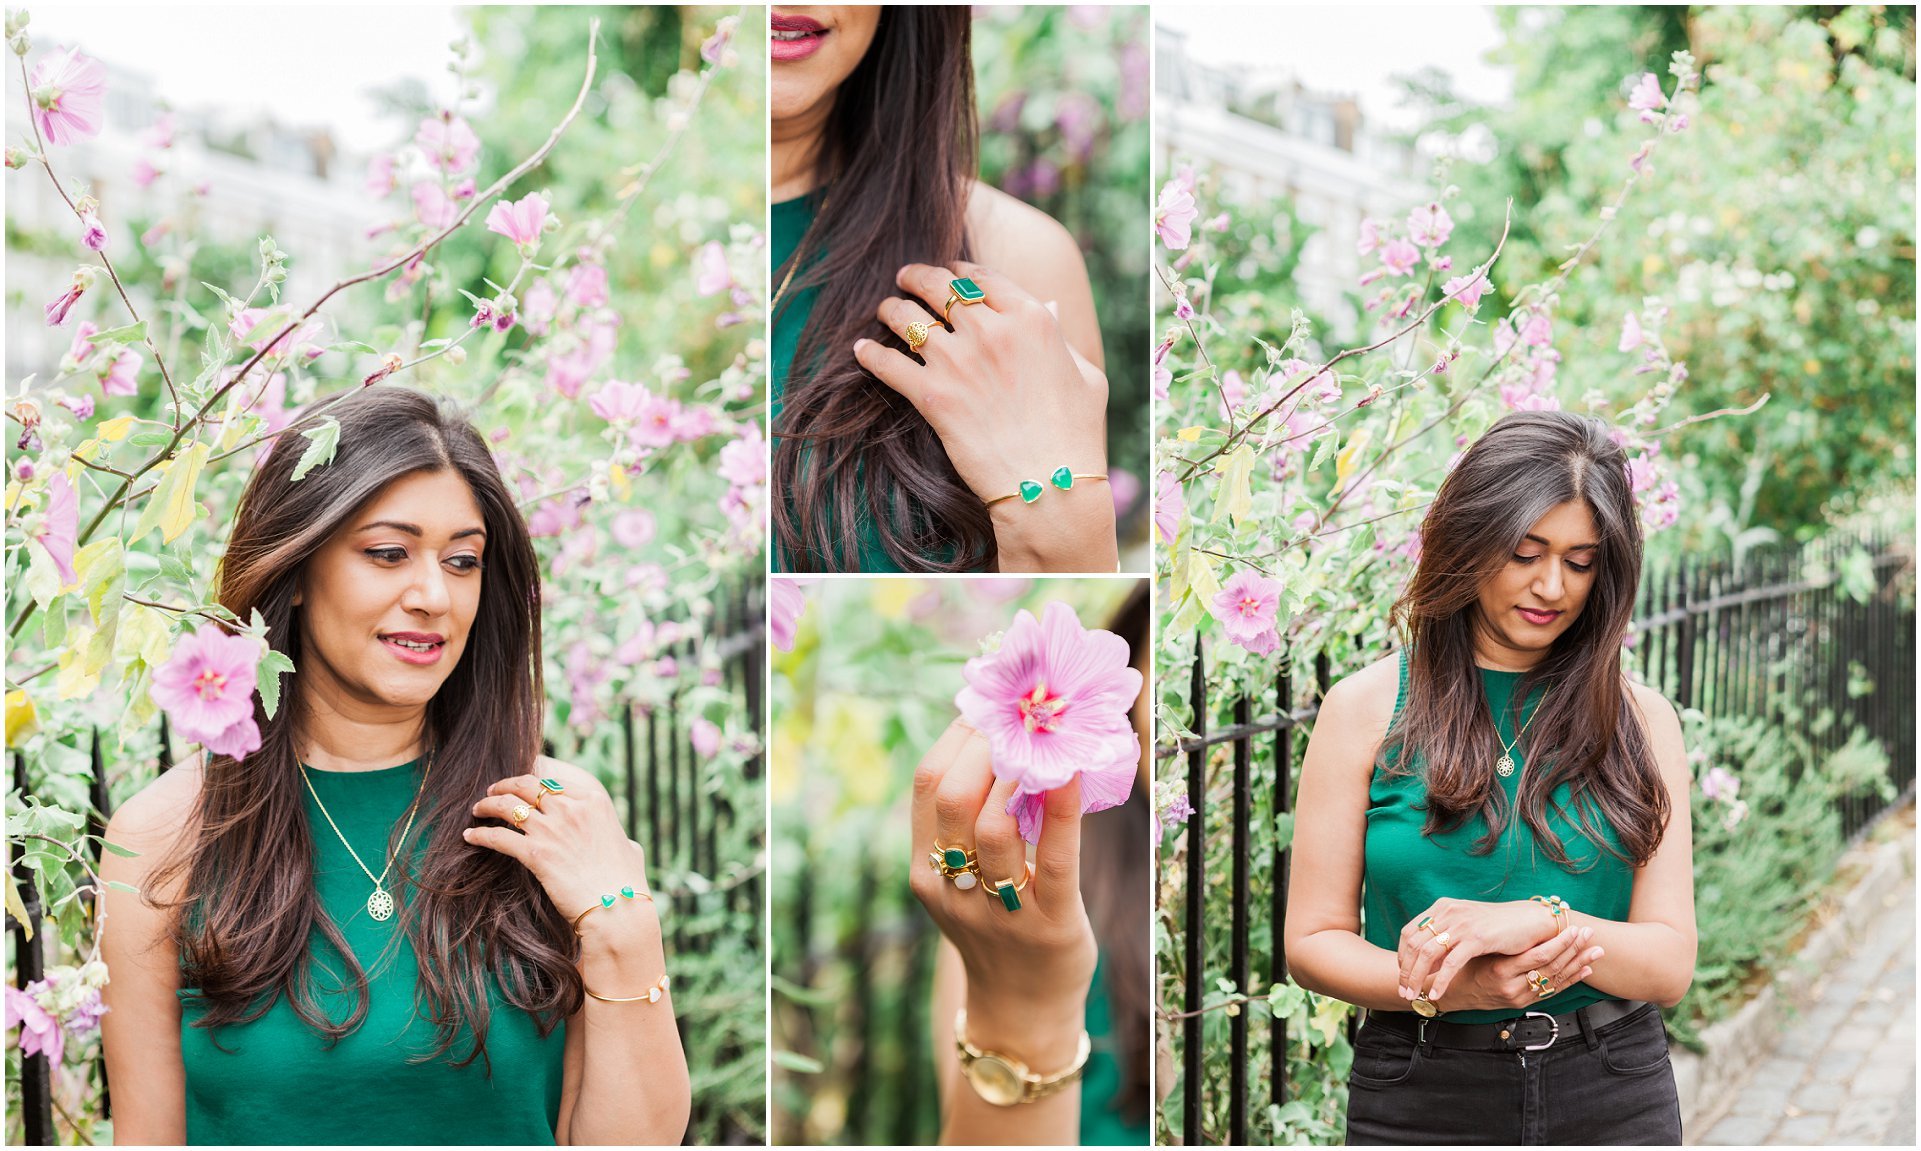 Summer brand shoot of Jewellery brand designer in West London. Close up of female wearing jewellery. Images by London brand photographer AKP Branding Stories